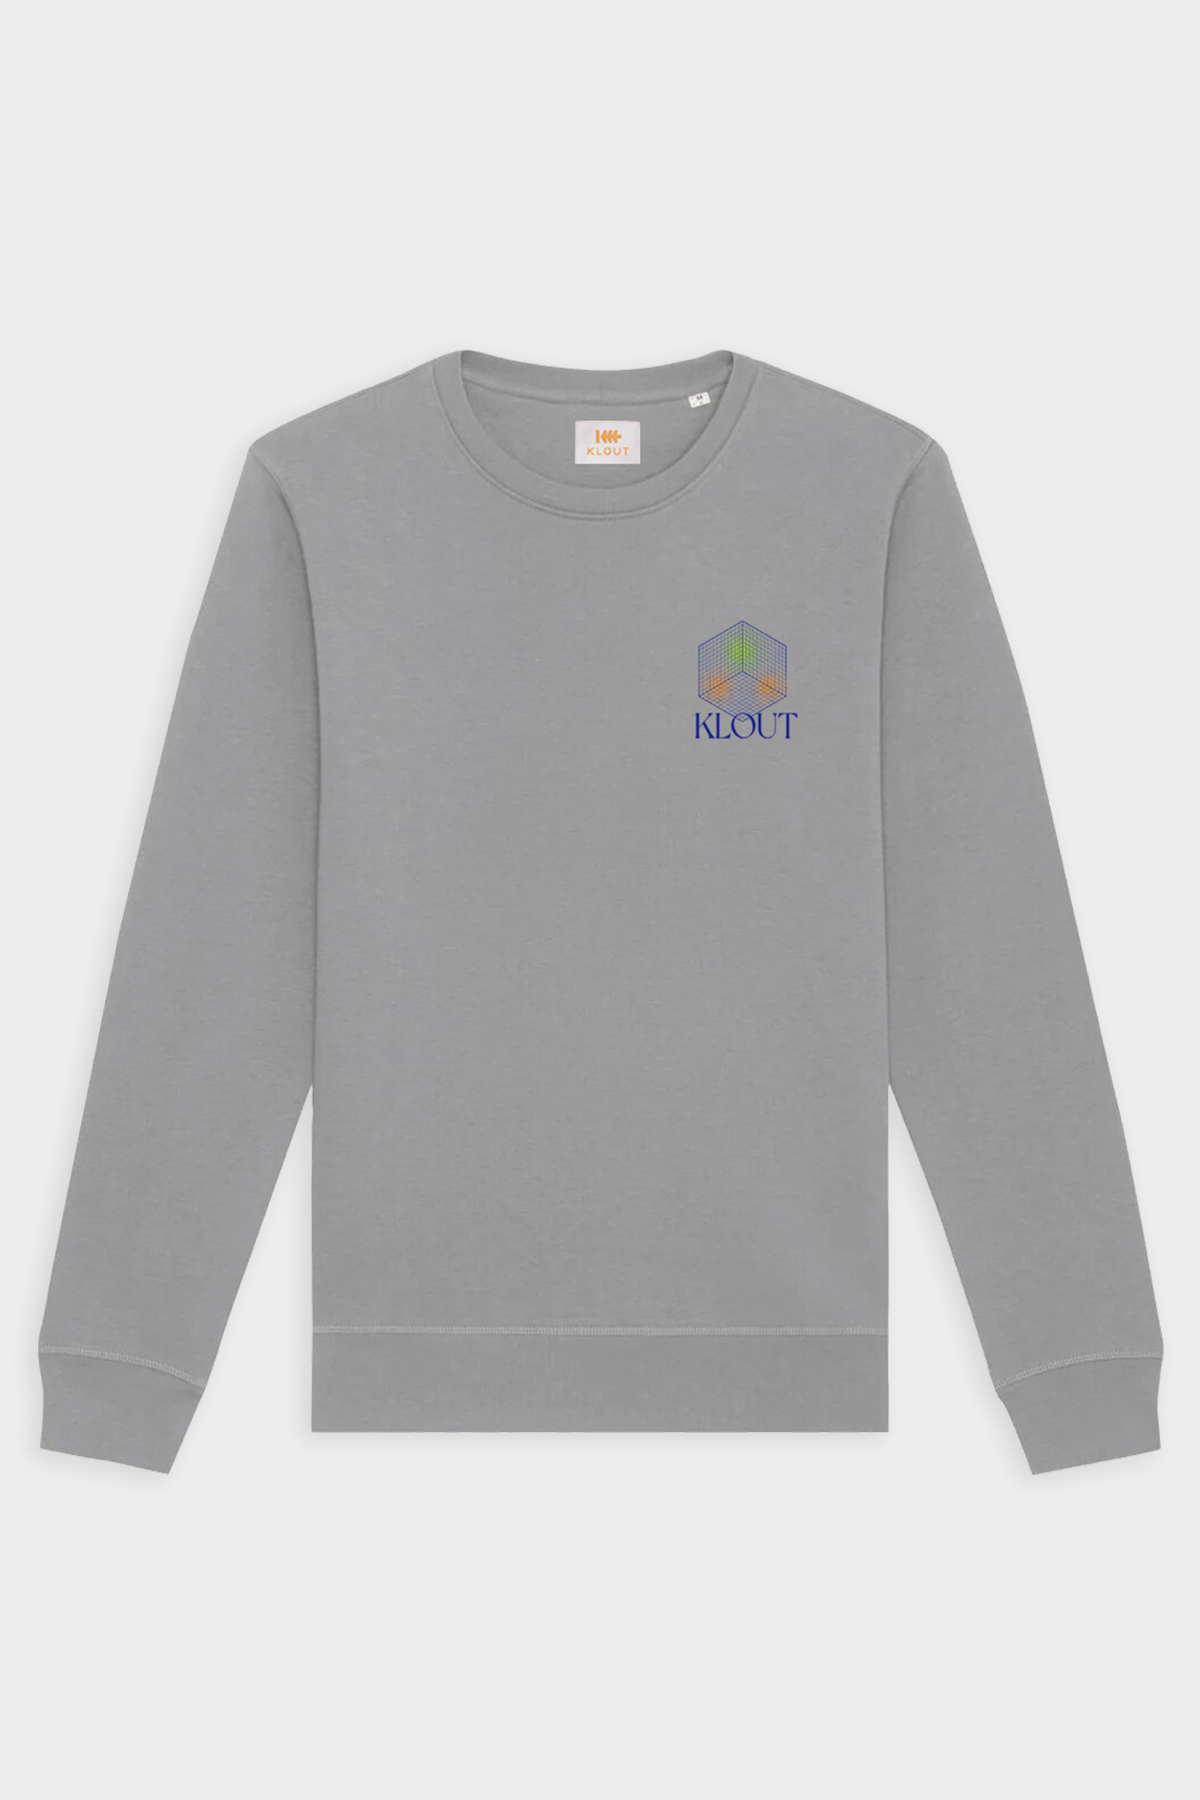 Sudadera Klout Aesthetic Gris para Hombre y Mujer